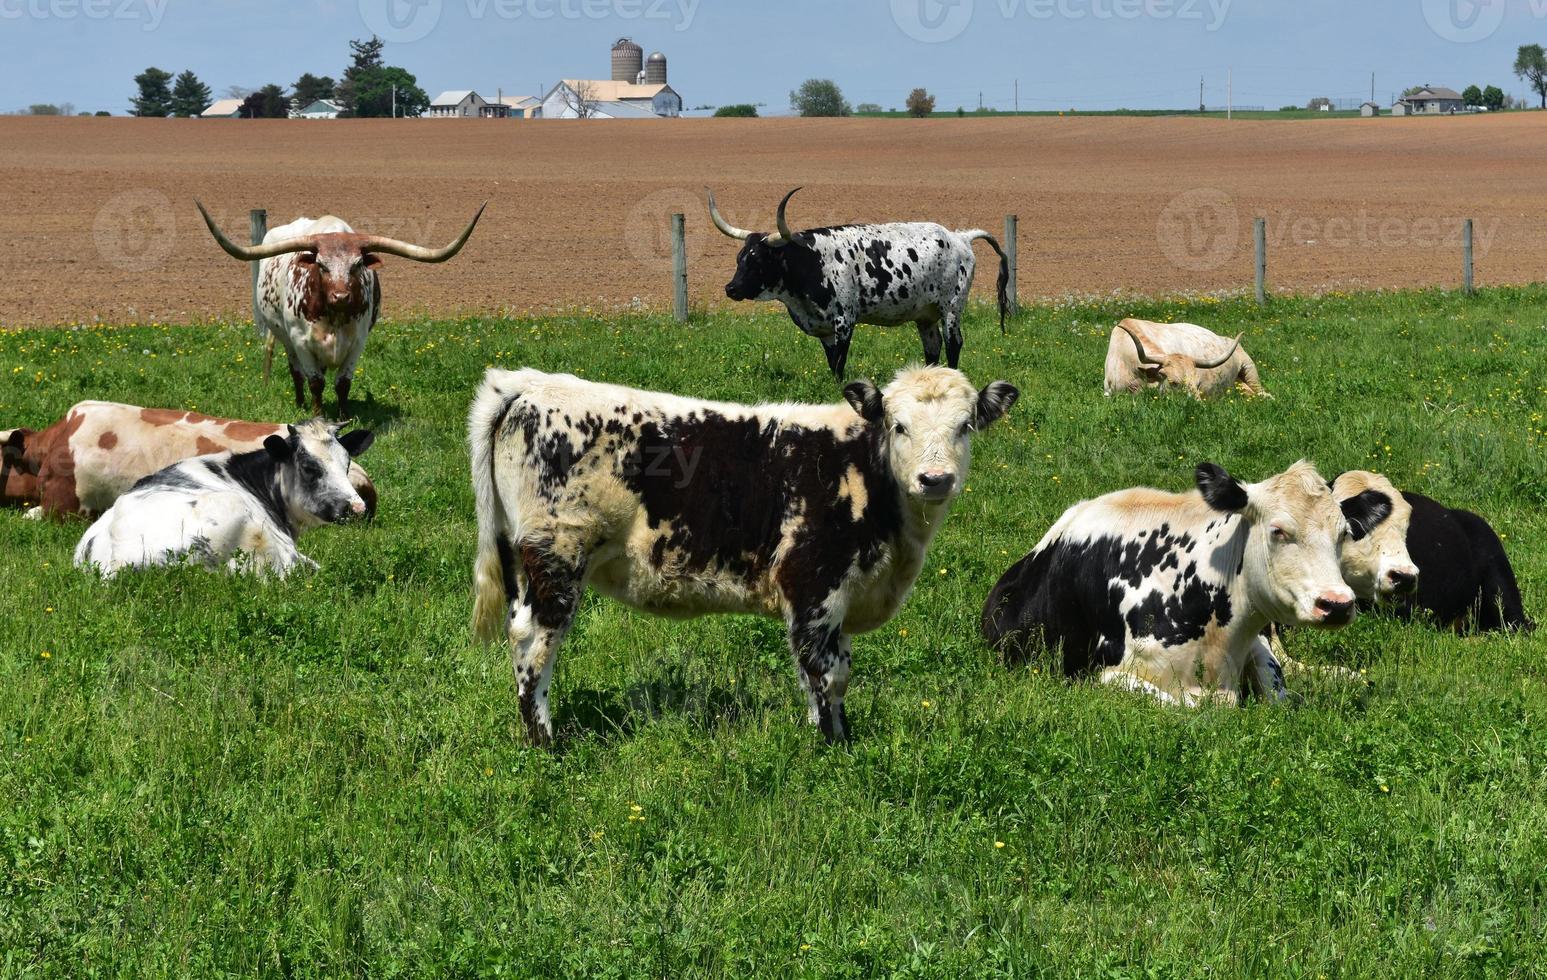 Group of Spotted Cows and Livestock in a Field. photo